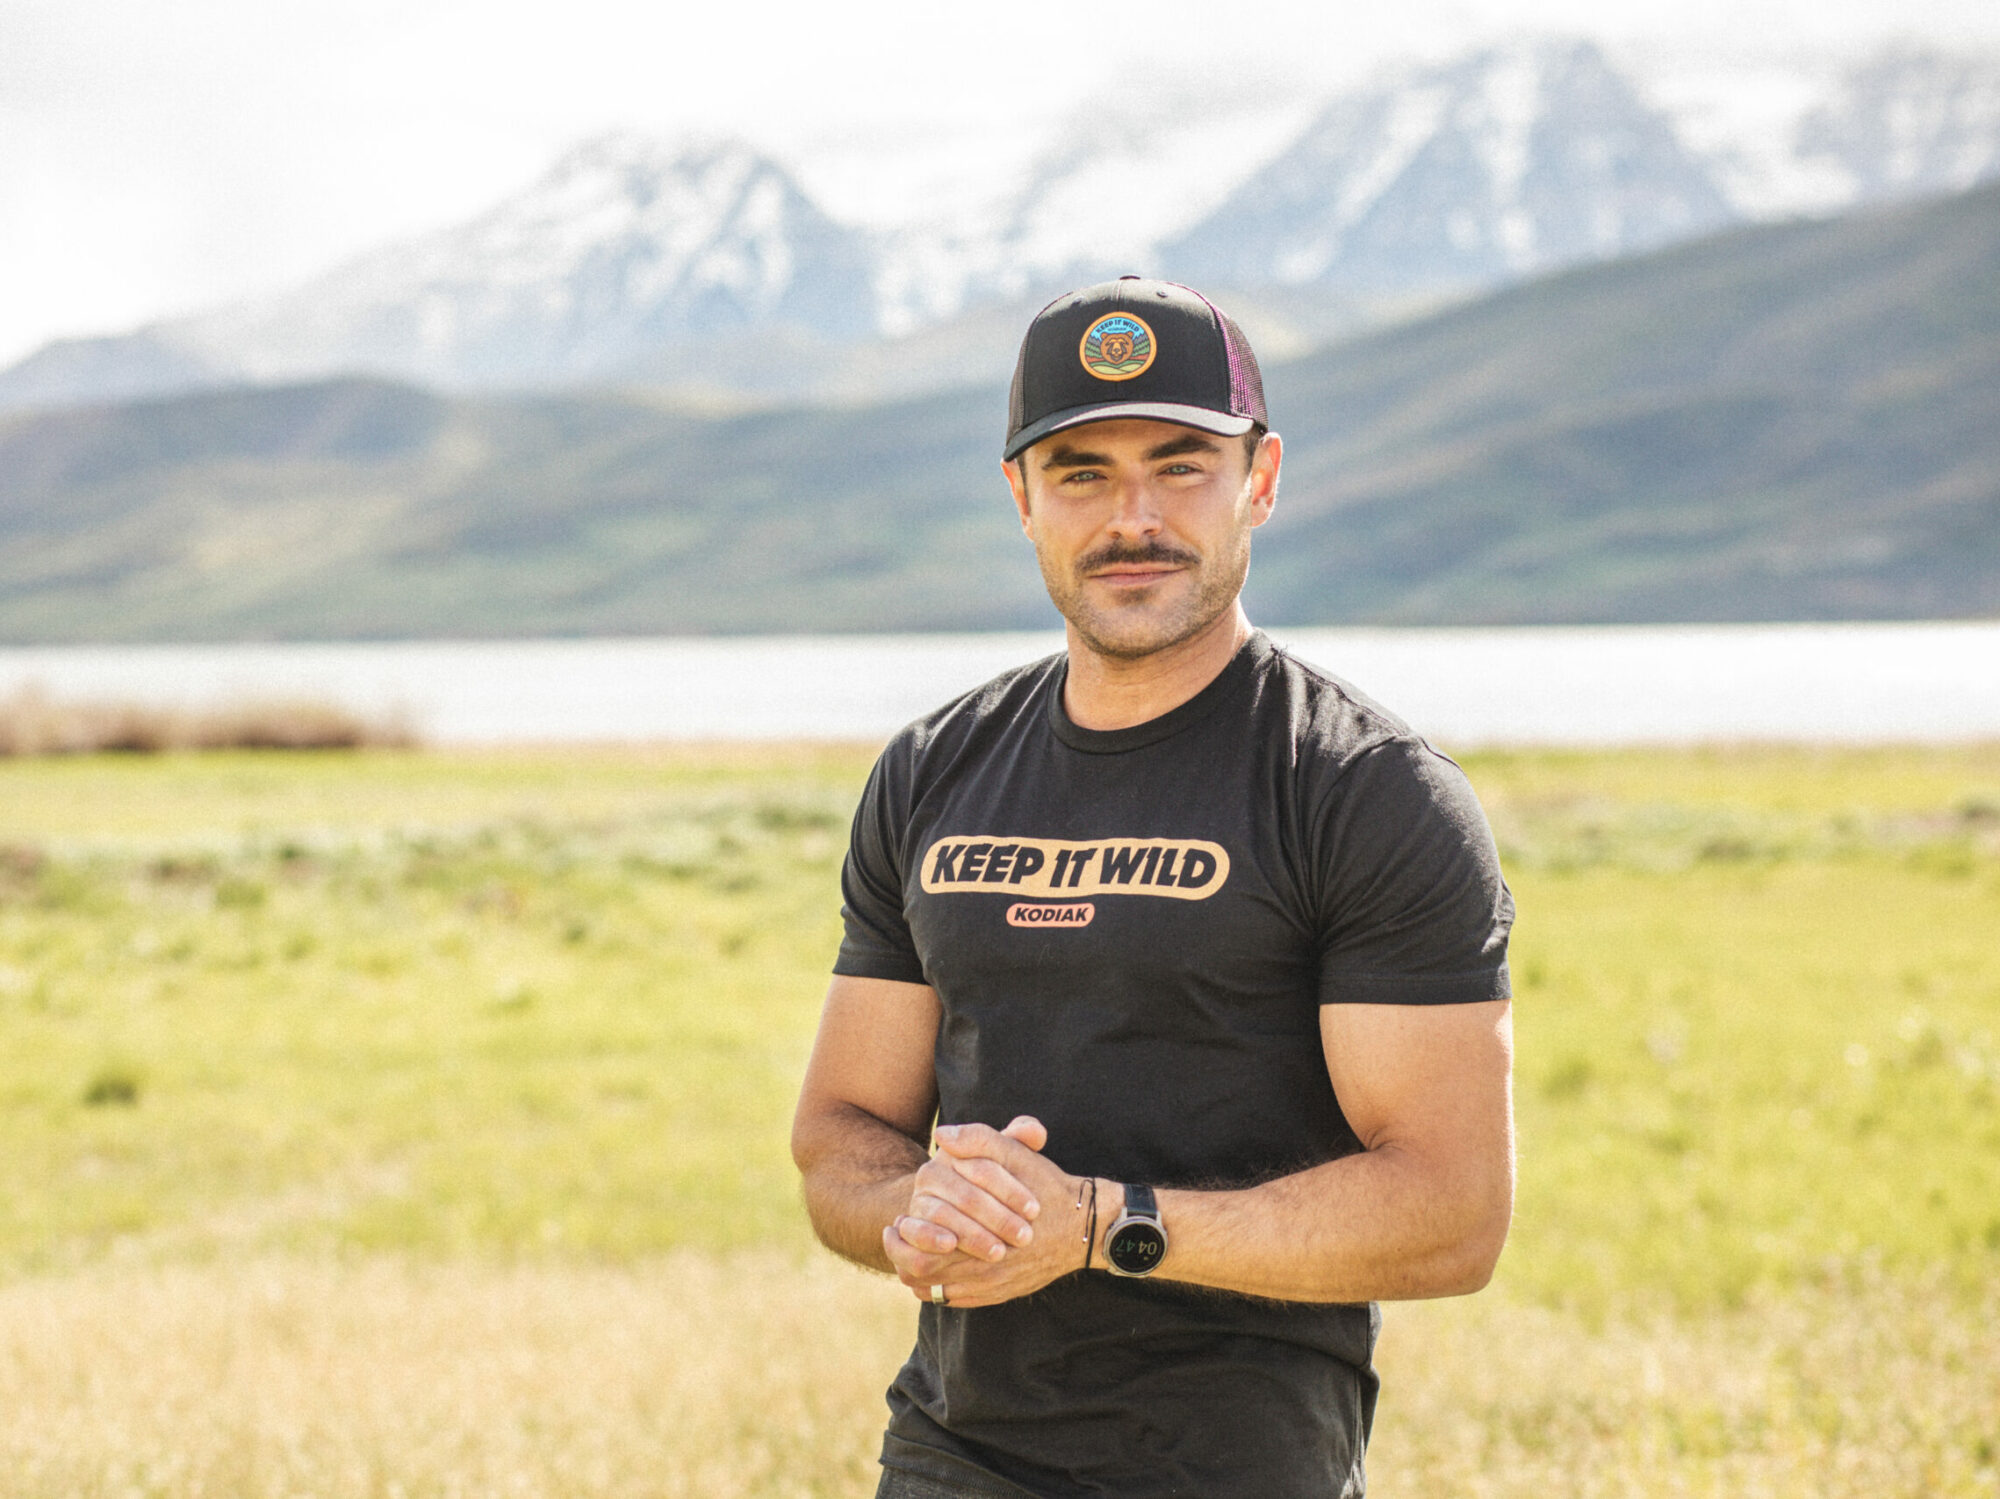 In 2022, Zac Efron went from celebrity to C-suite officer at Kodiak Cakes, signaling a new age of authentic brand partnerships.